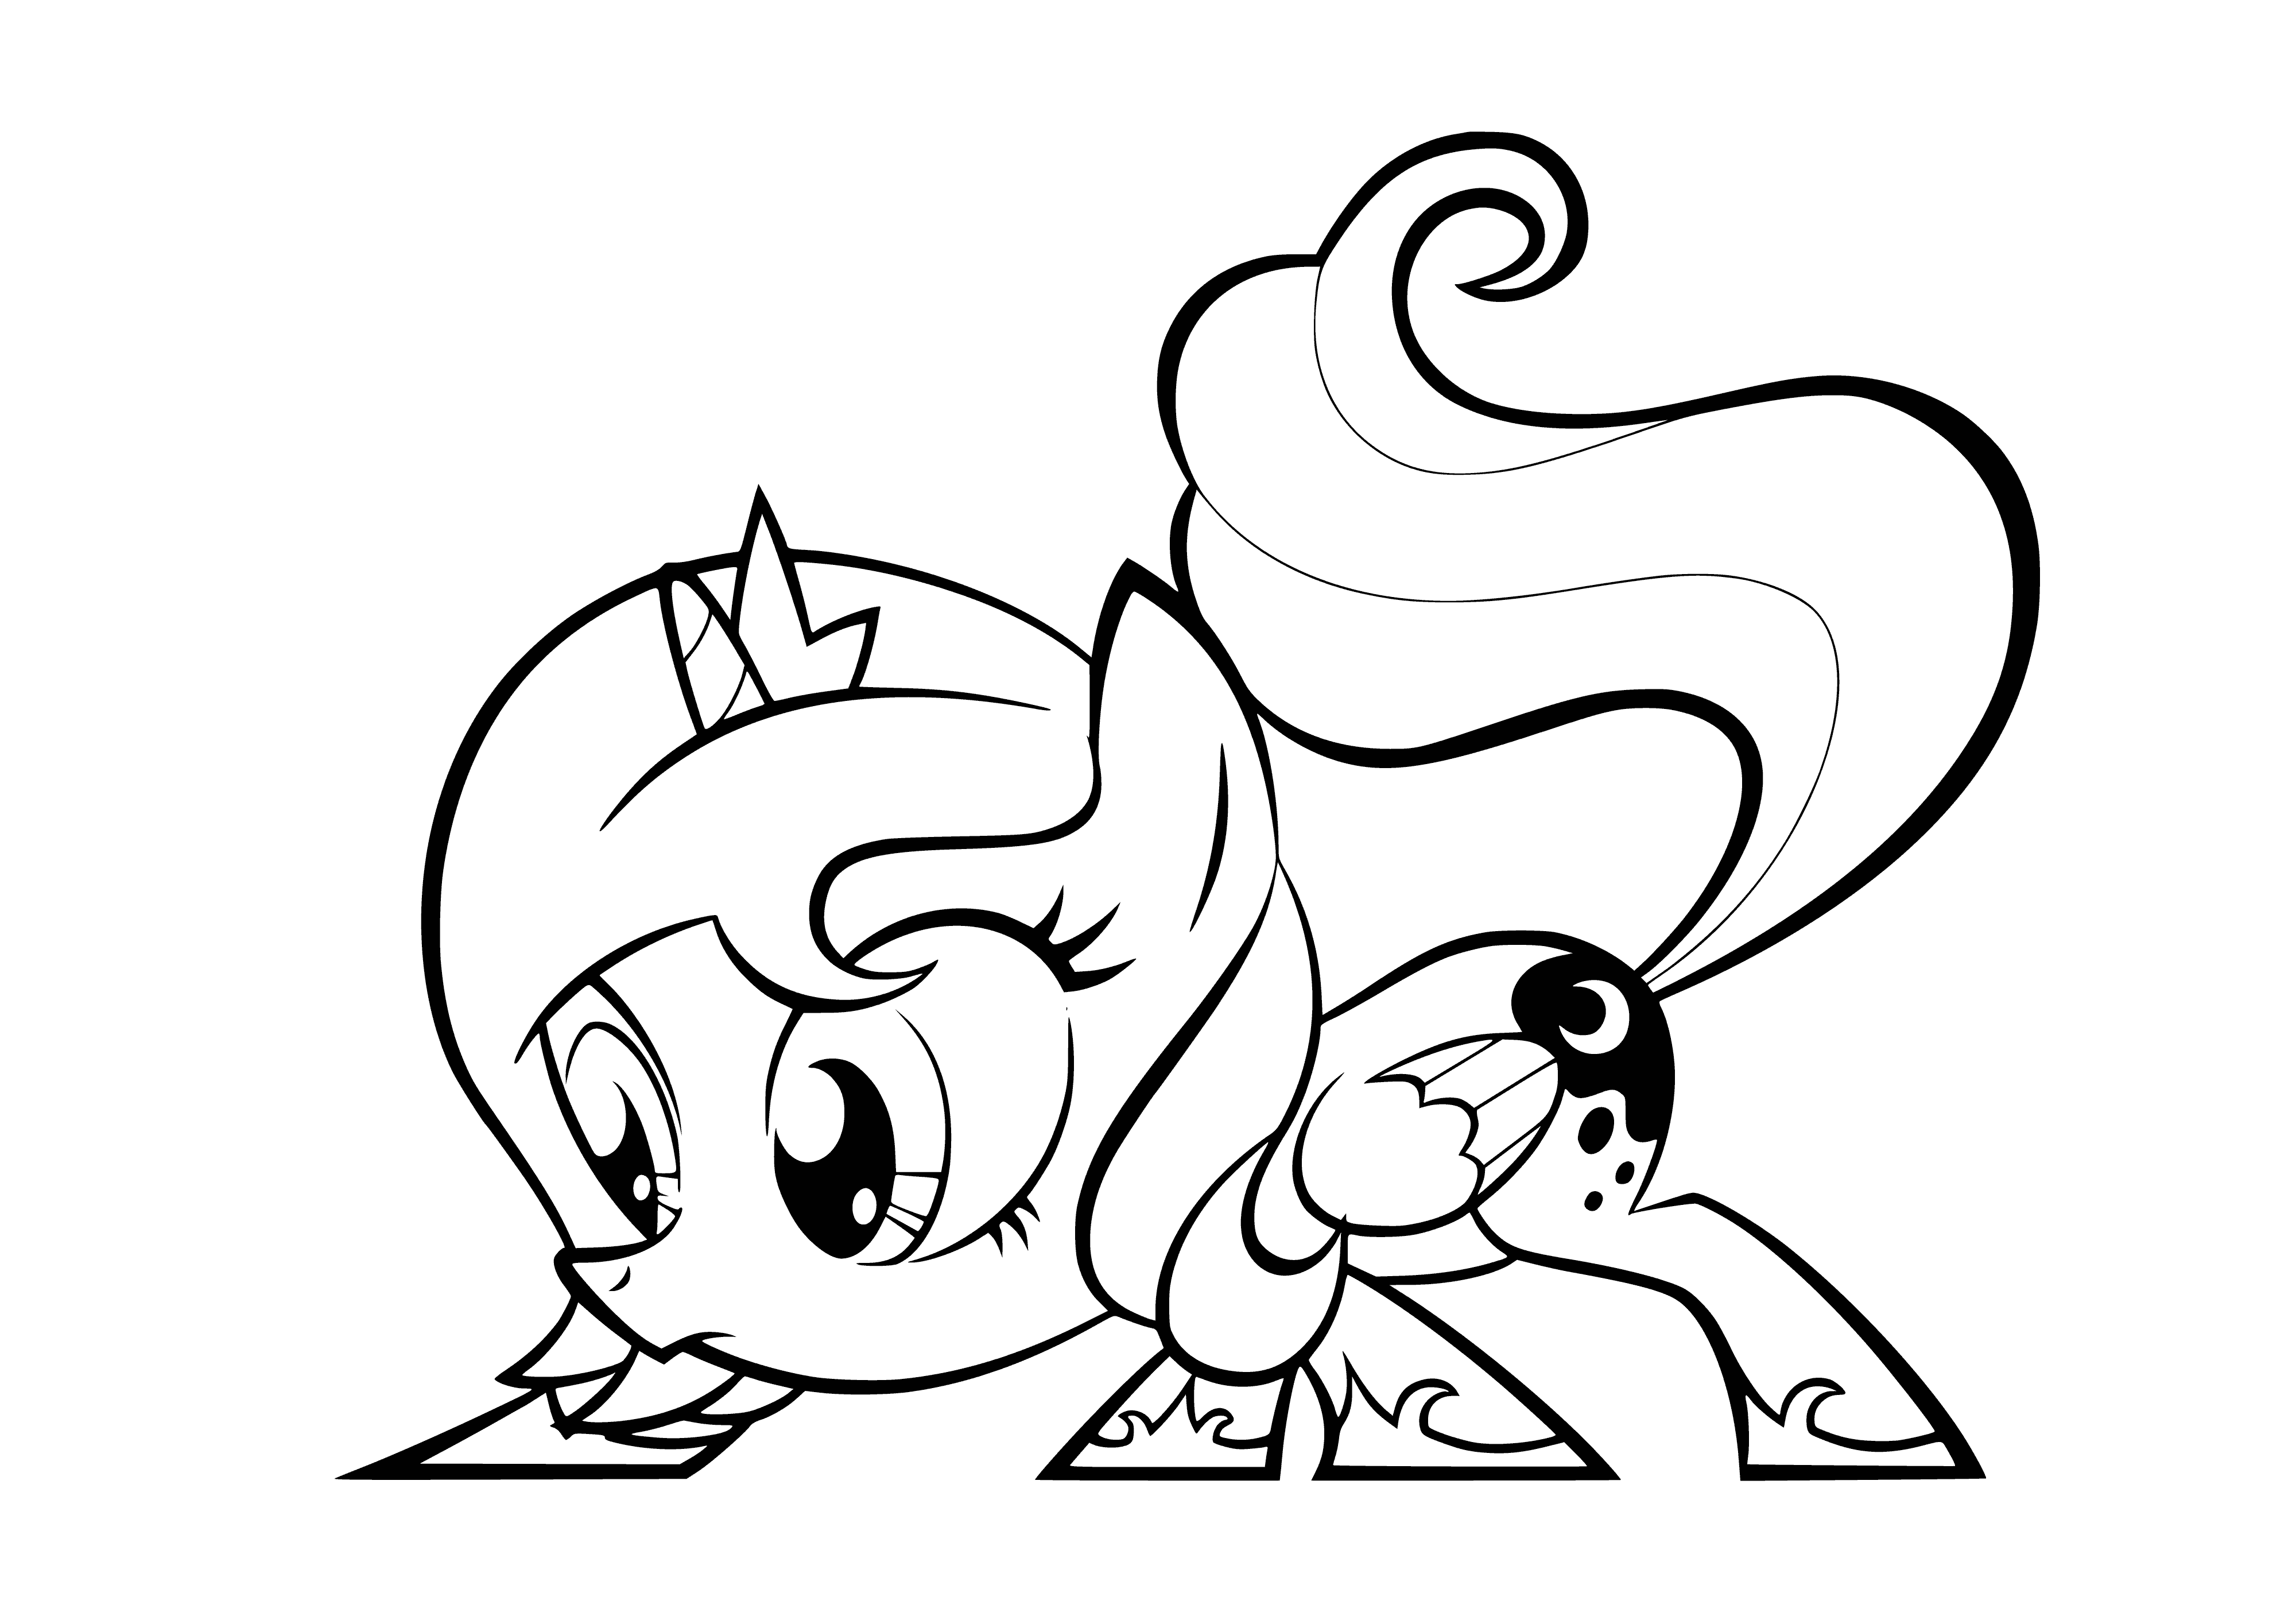 coloring page: Princess Luna is a cute and adorable baby, wearing a pink dress with a pink bow in her hair. Holding a pink teddy bear, she looks very content.